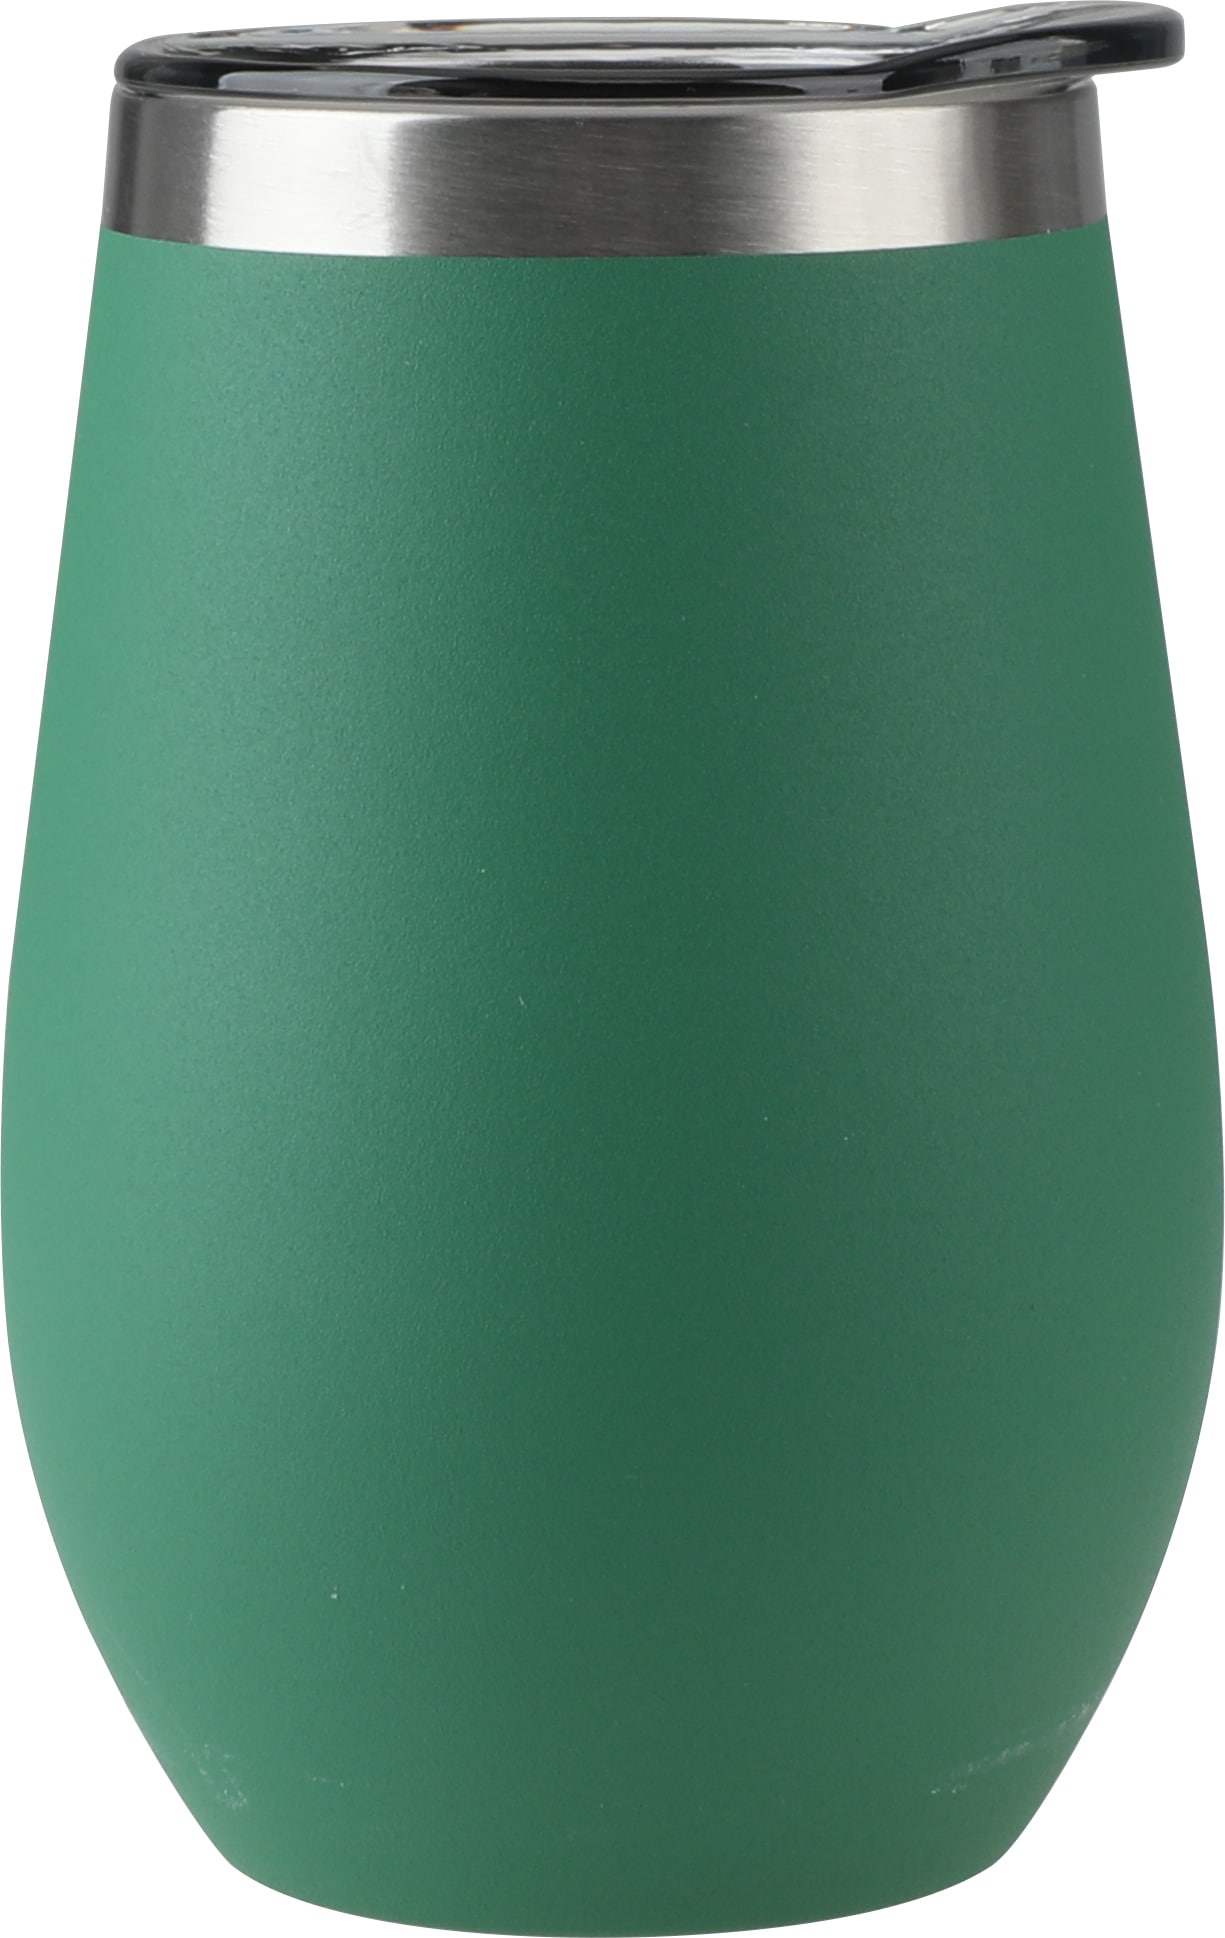 12 oz Wine Tumbler Green to Green Glow Stainless Steel